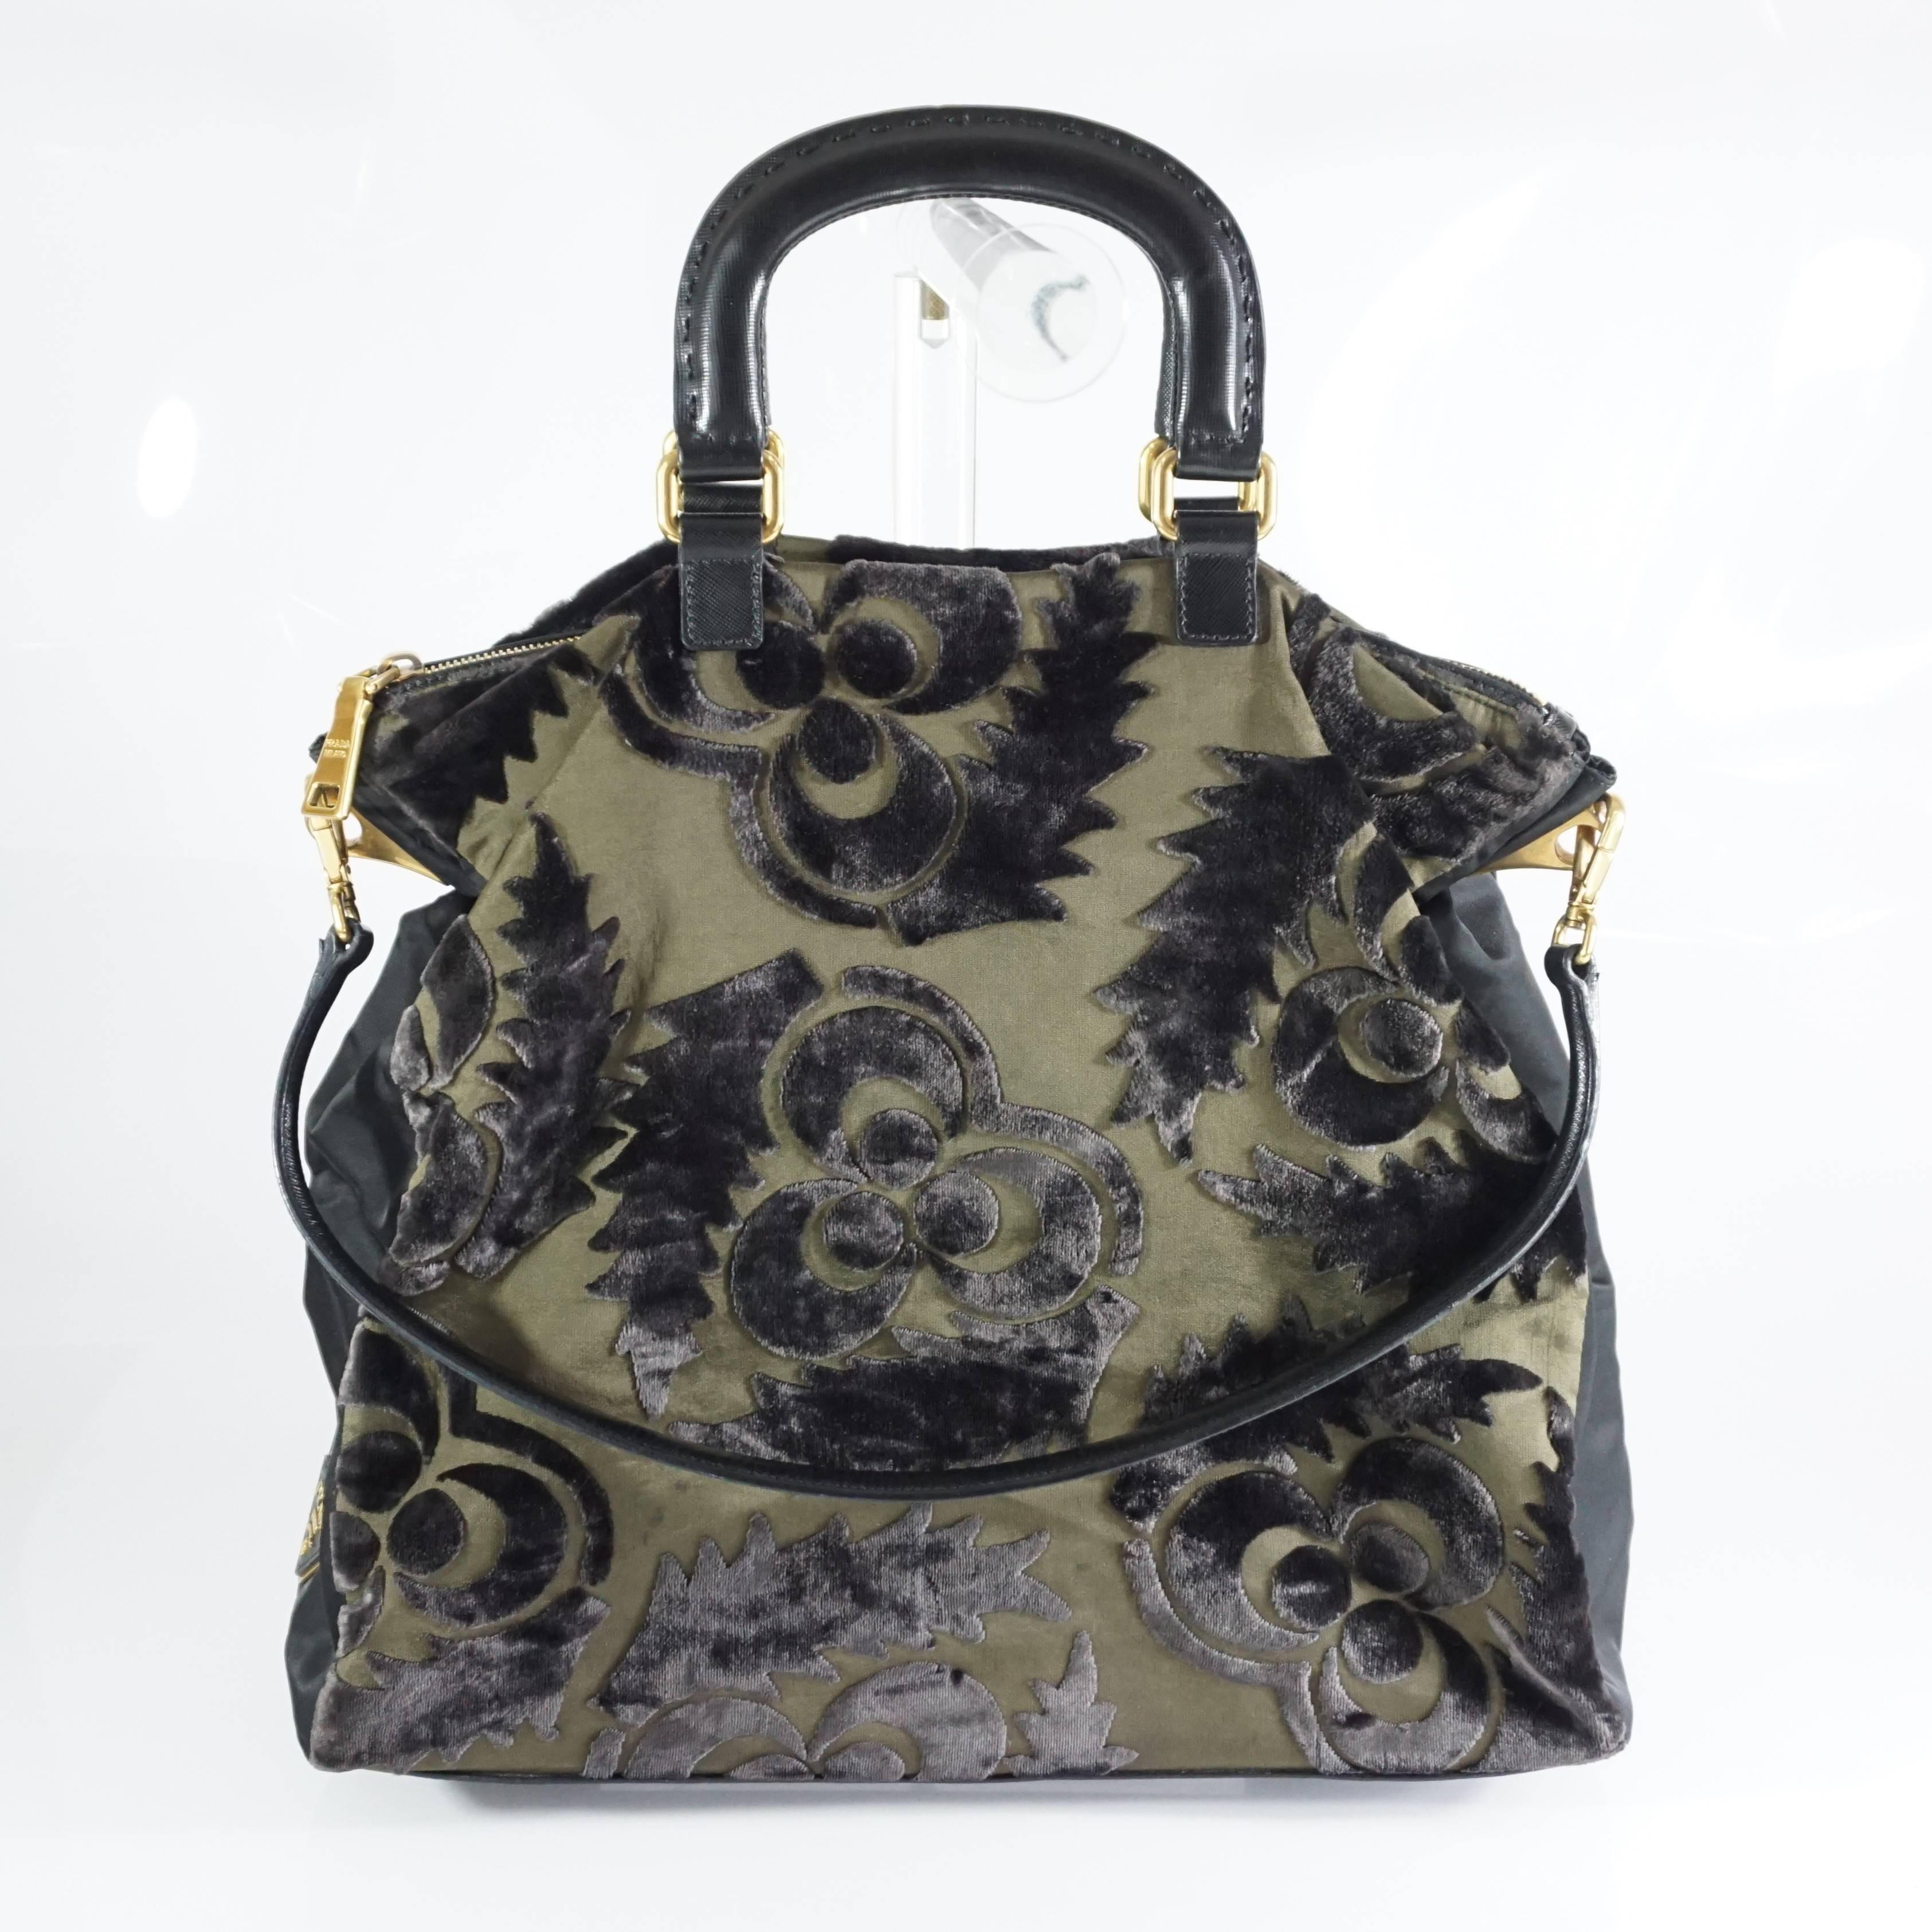 This Prada cut velvet bag is a unique piece. It features a floral velvet design, black nylon sides, black saffiano leather handles, and a shoulder strap. The bag is in good condition with a couple small blemishes on the fabric and a mark on the